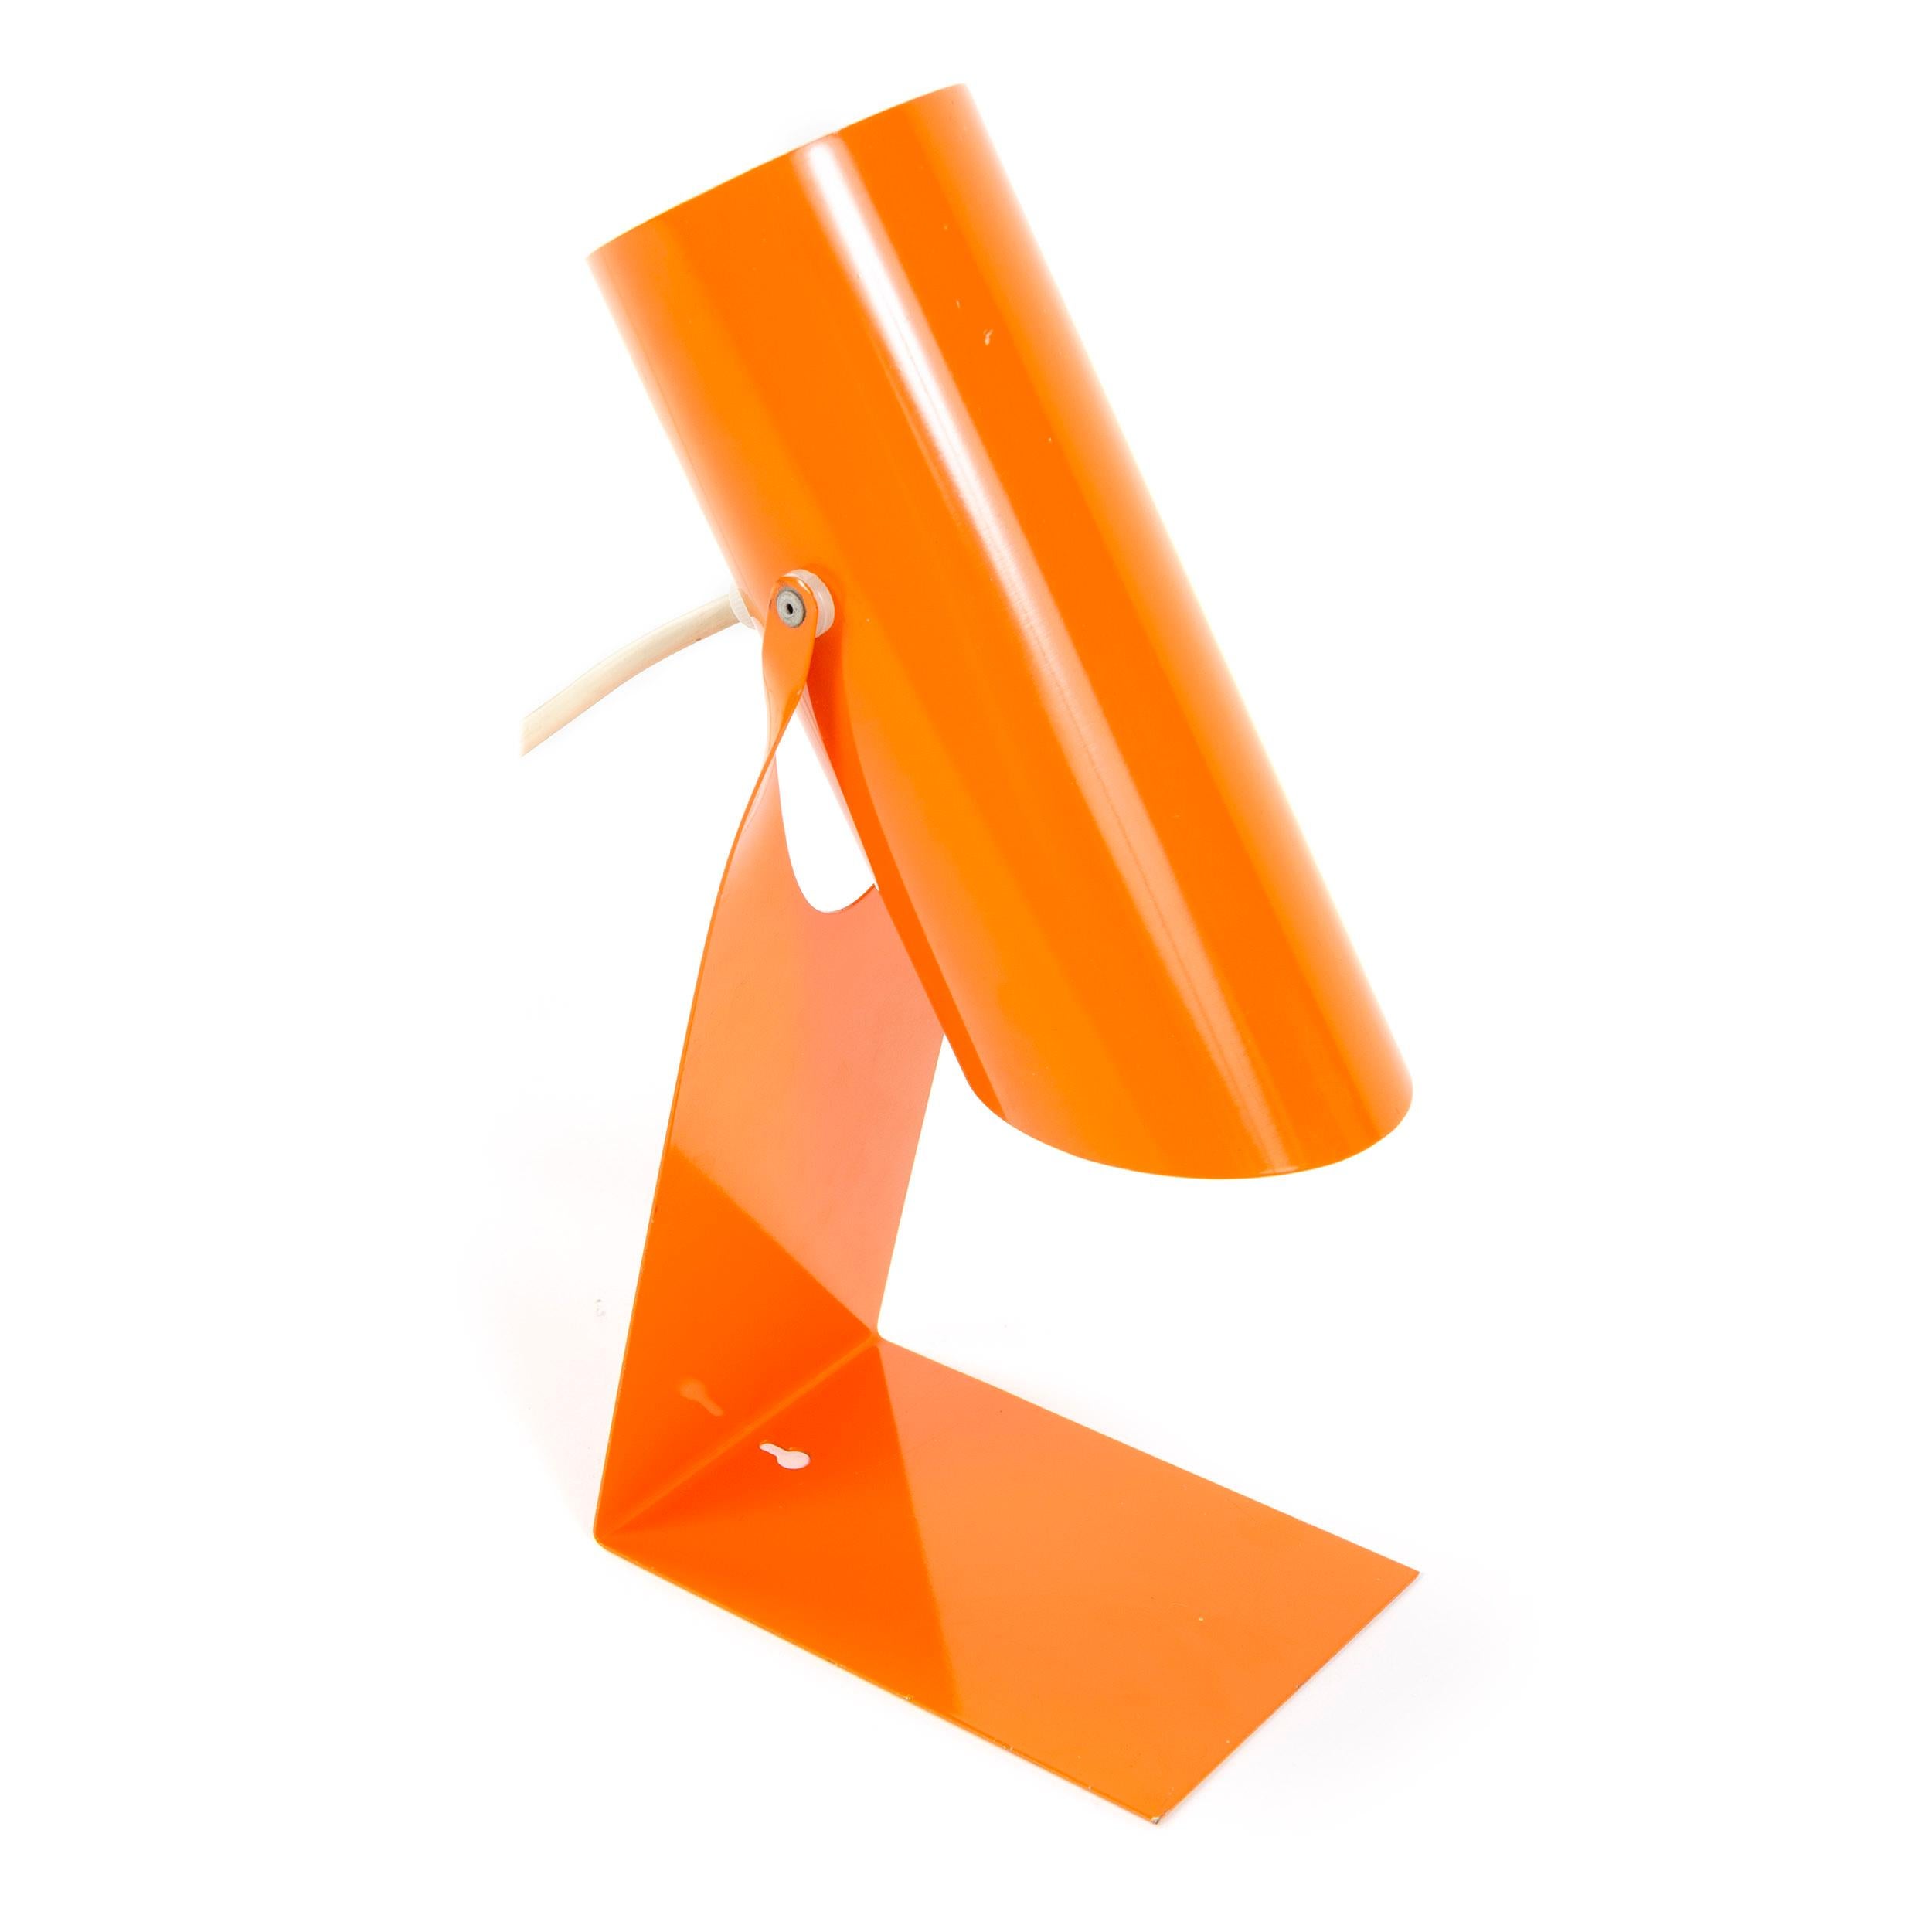 A versatile and vibrant orange enamel lighting device that primarily functions in a desk or table capacity but has a keyhole slot which allows it to function additionally as a wall lamp. The base is one piece of flat, folded steel cradling a